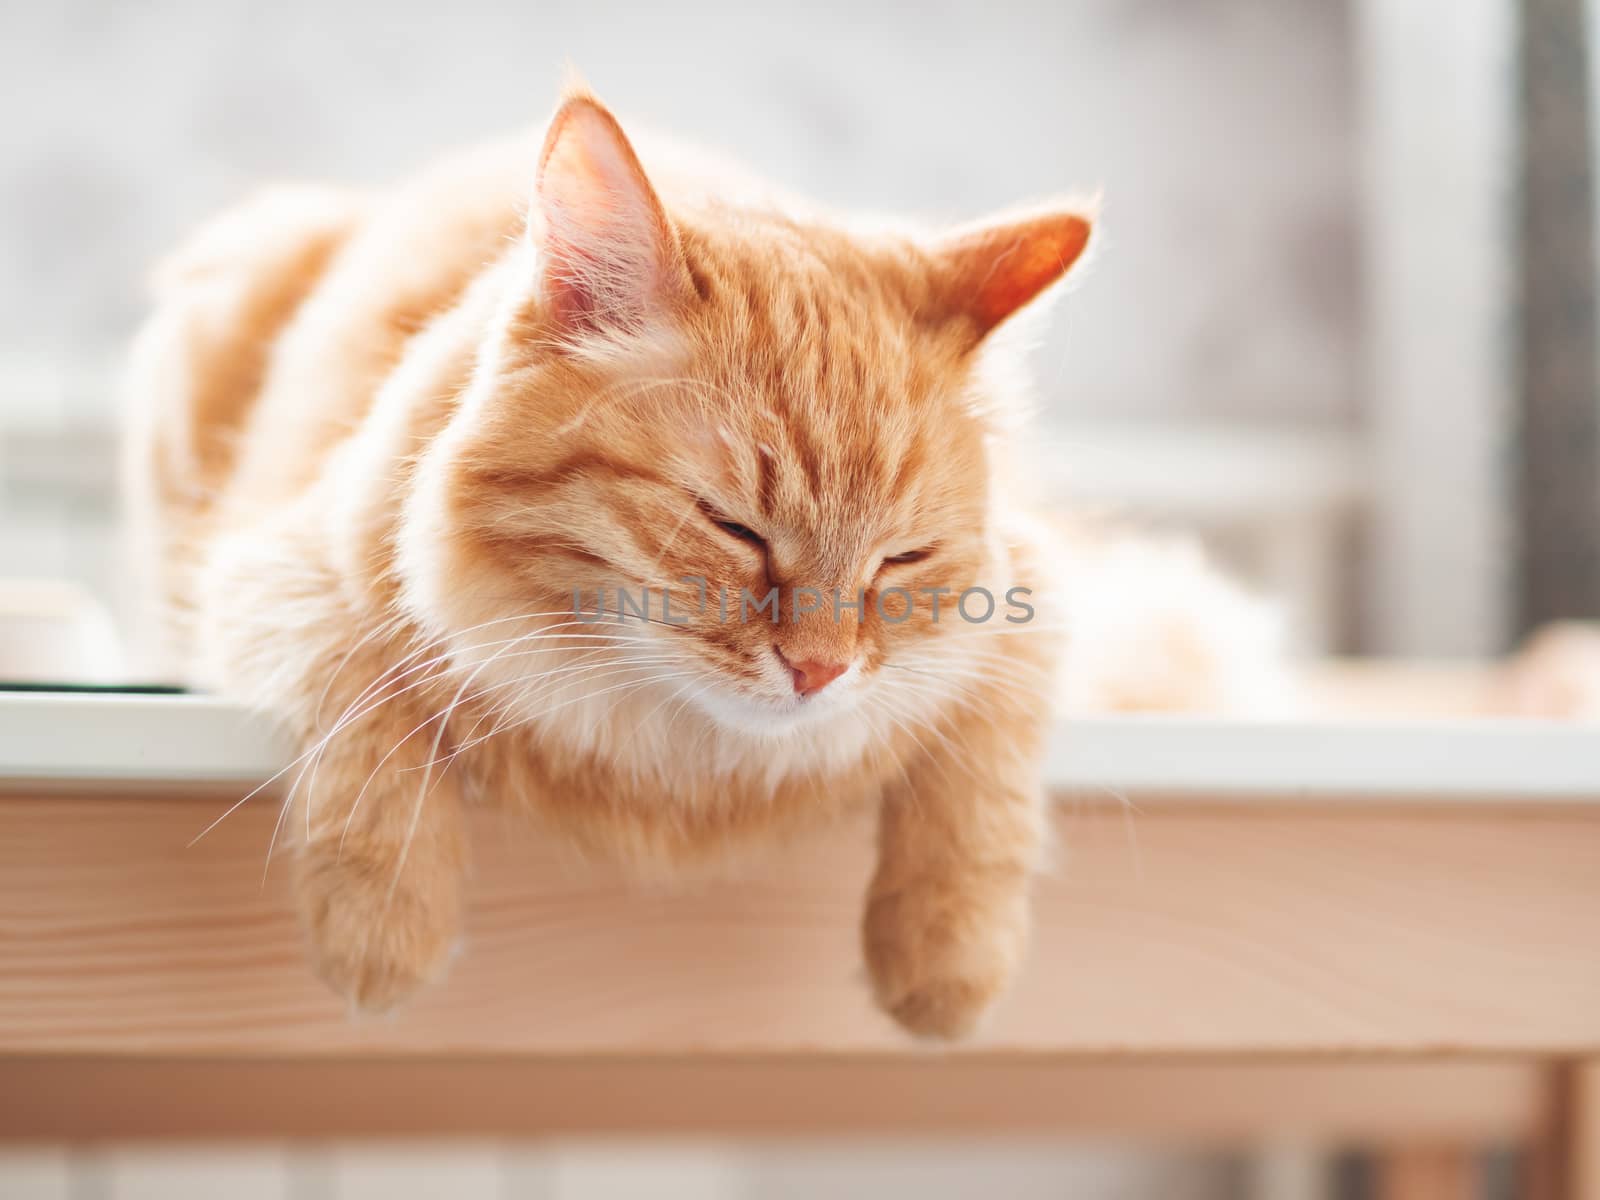 Close up portrait of cute ginger cat. Fluffy pet is sleeping. Domestic kitty sitting on table.